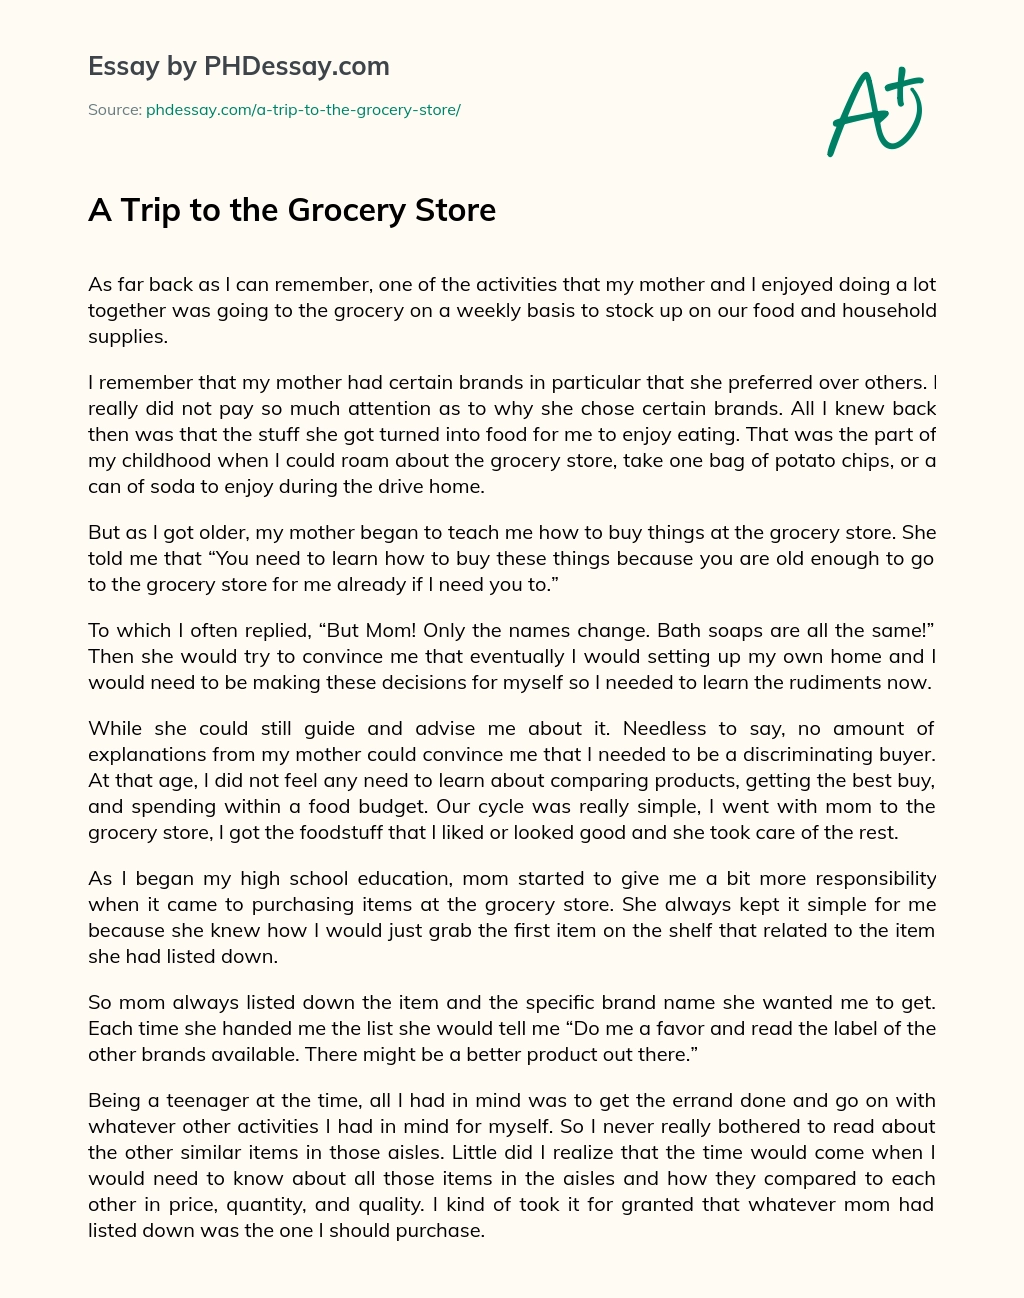 A Trip to the Grocery Store essay